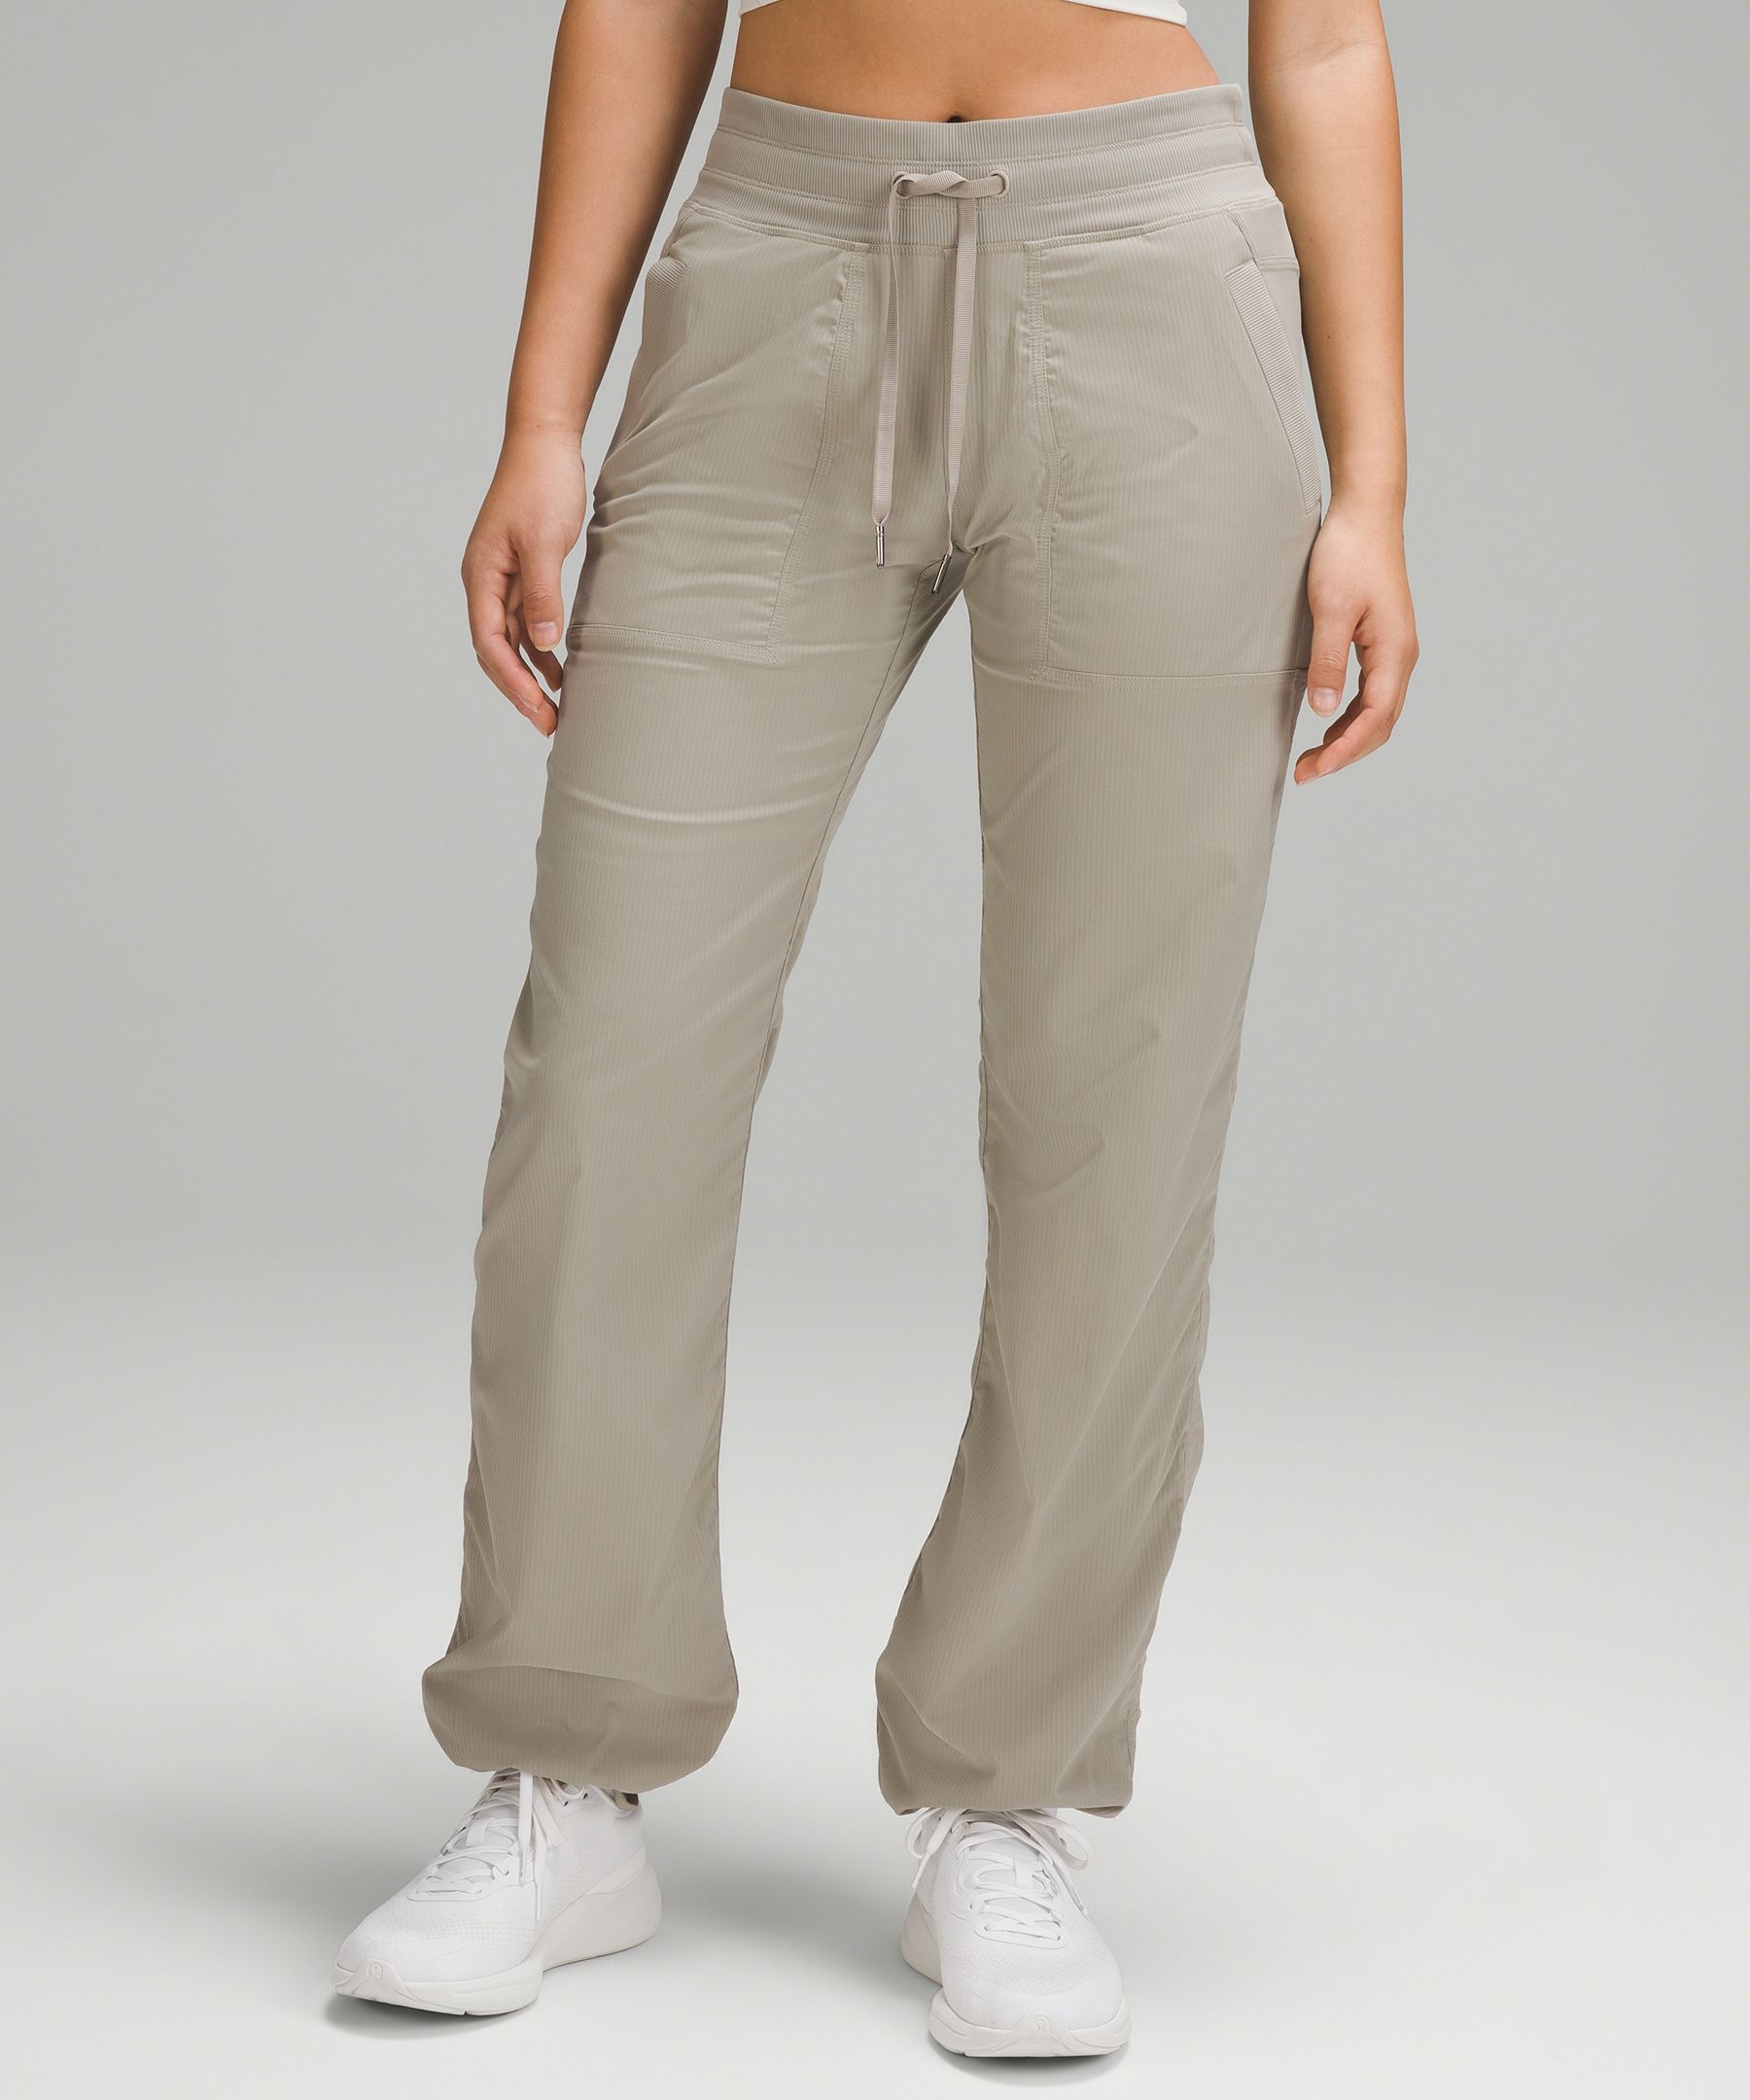 Women's On The Move Pants